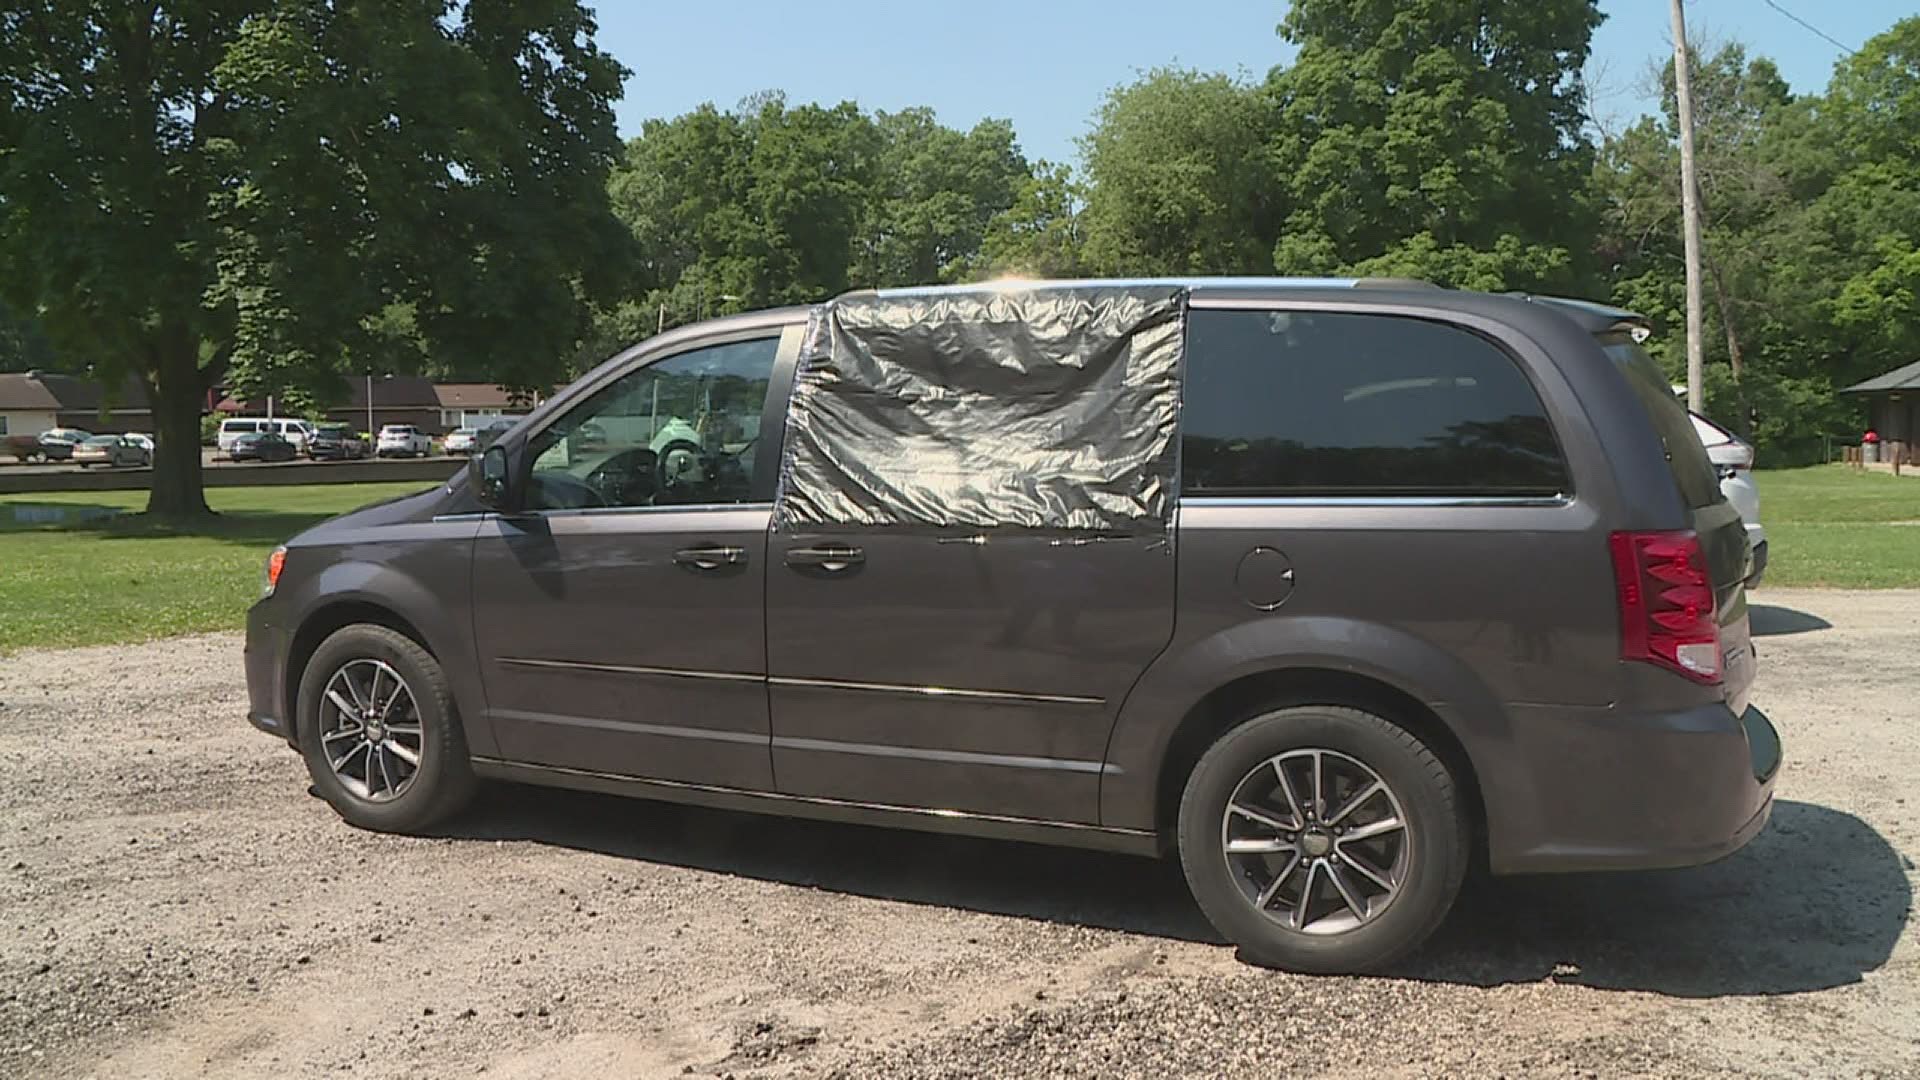 Police say women's vehicles are being targeted as thieves search for purses left in plain view.